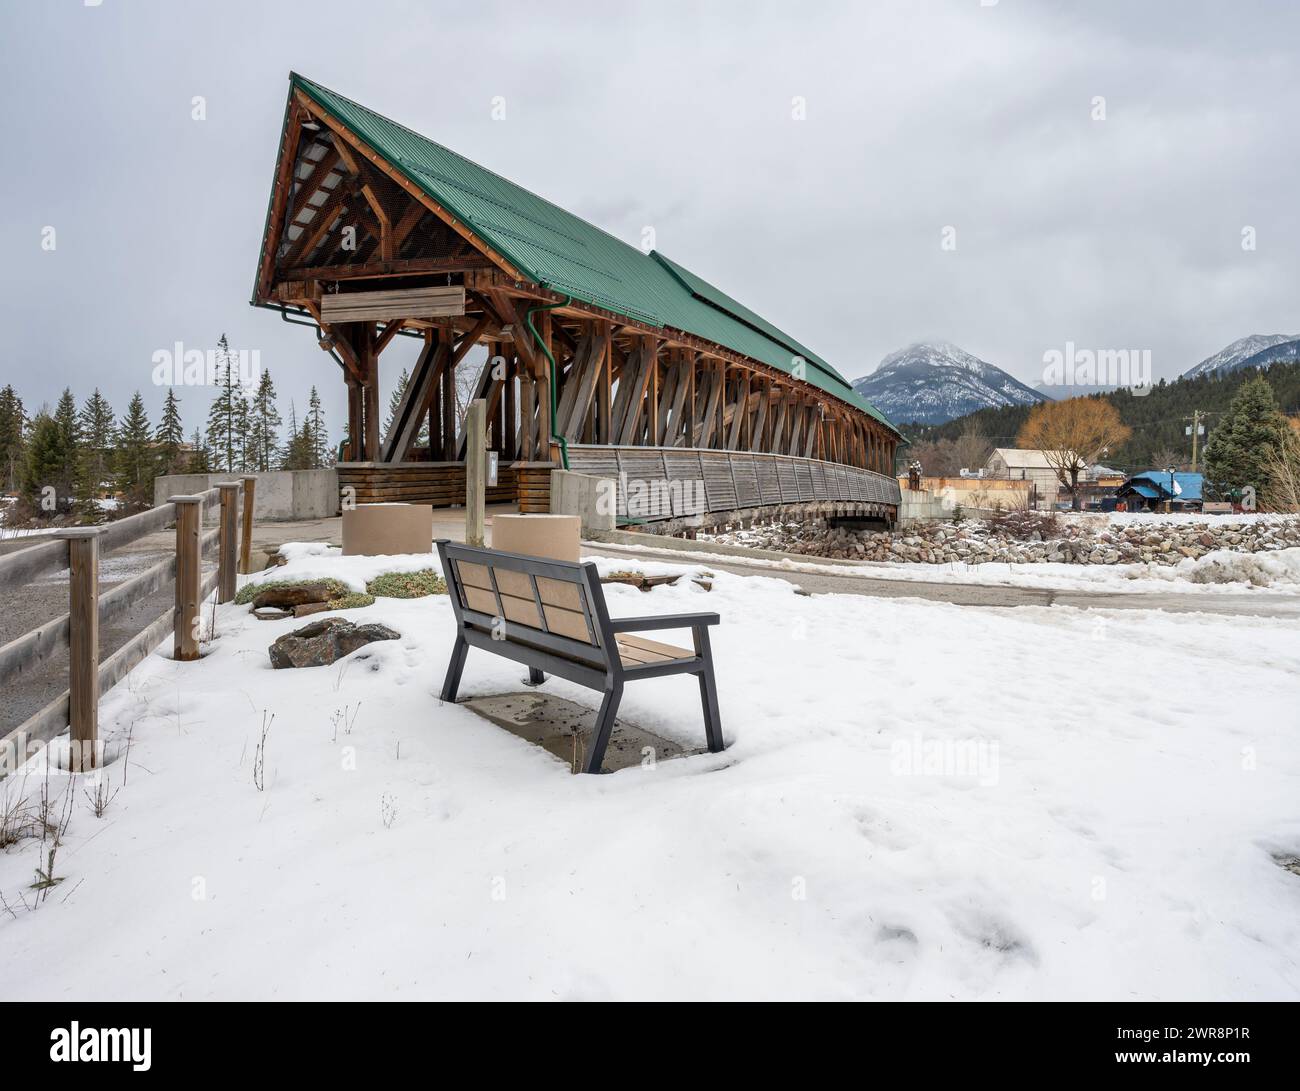 Covered Bridge over the Kicking Horse River at Golden, British Columbia Stock Photo